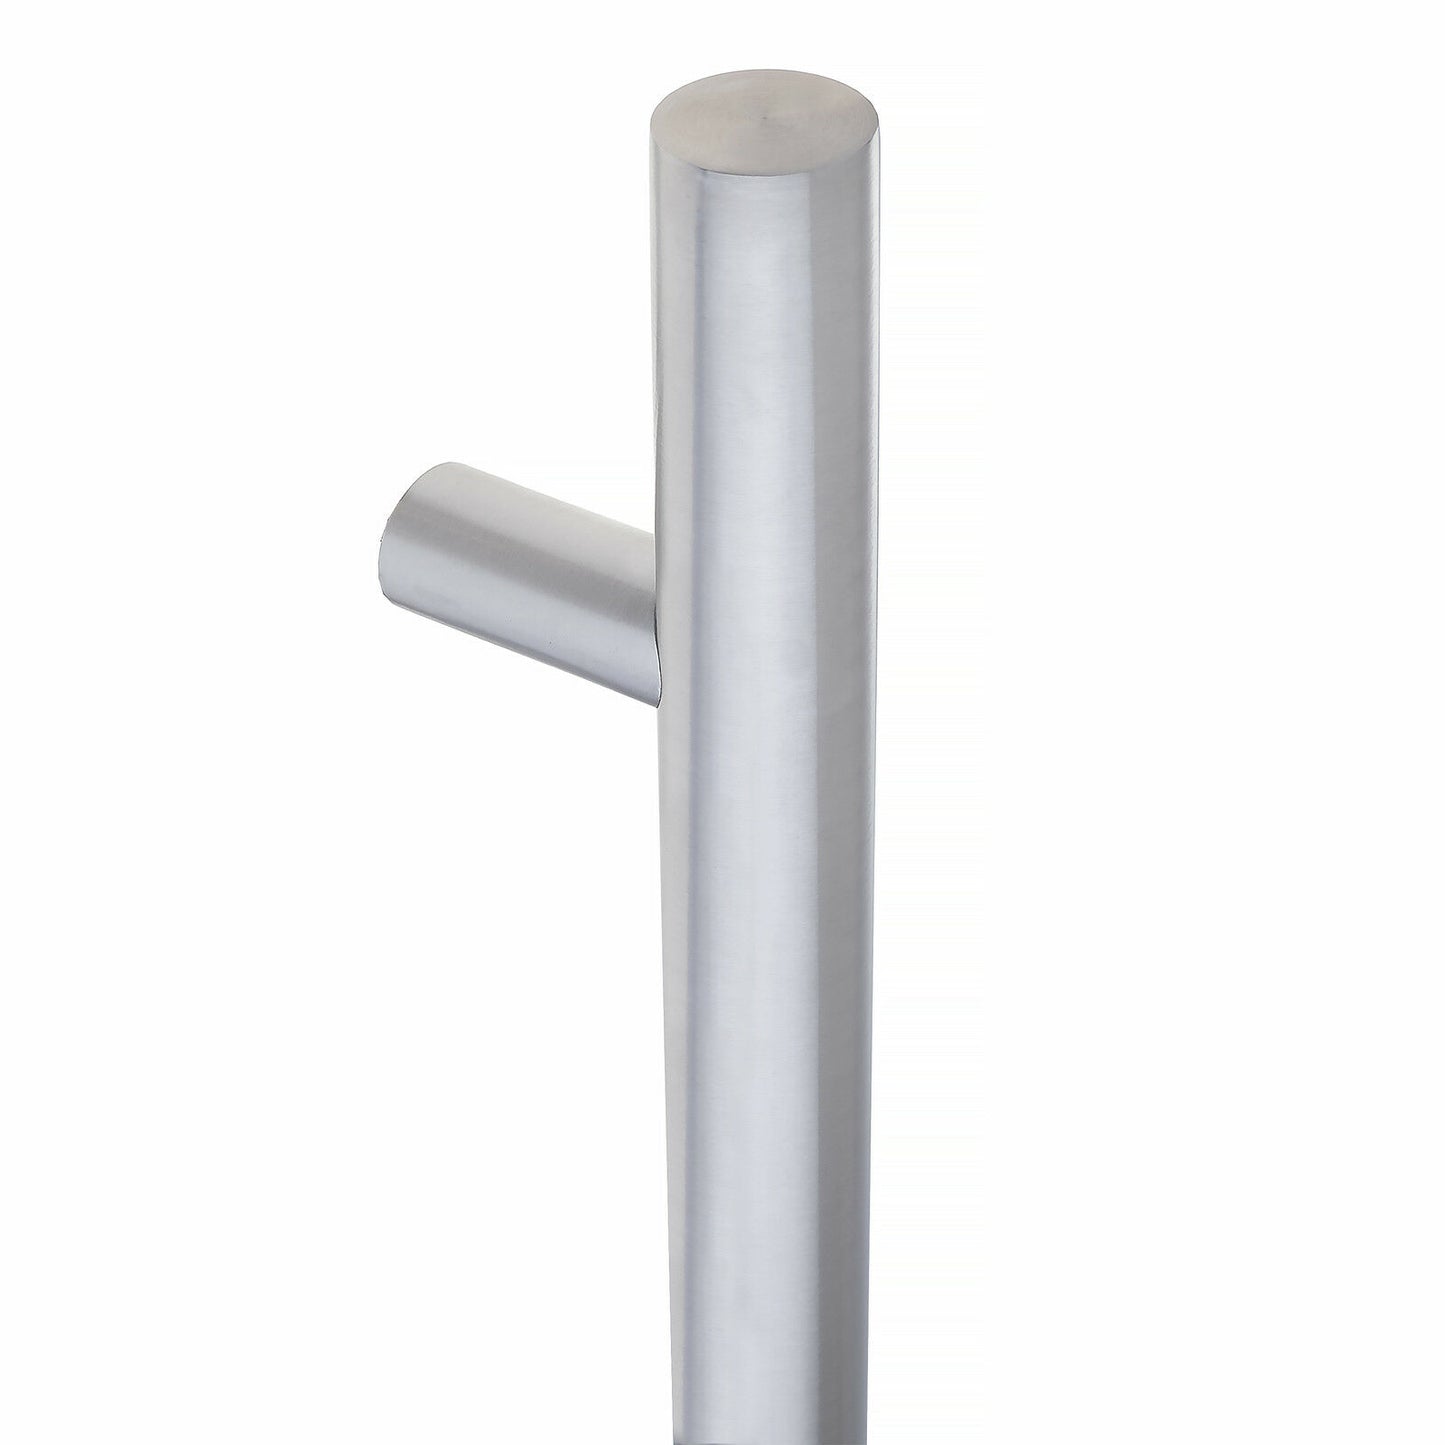 Pair Of Satin Stainless Steel Straight T Bar Guardsman Pull Handles 1800 x 30mm